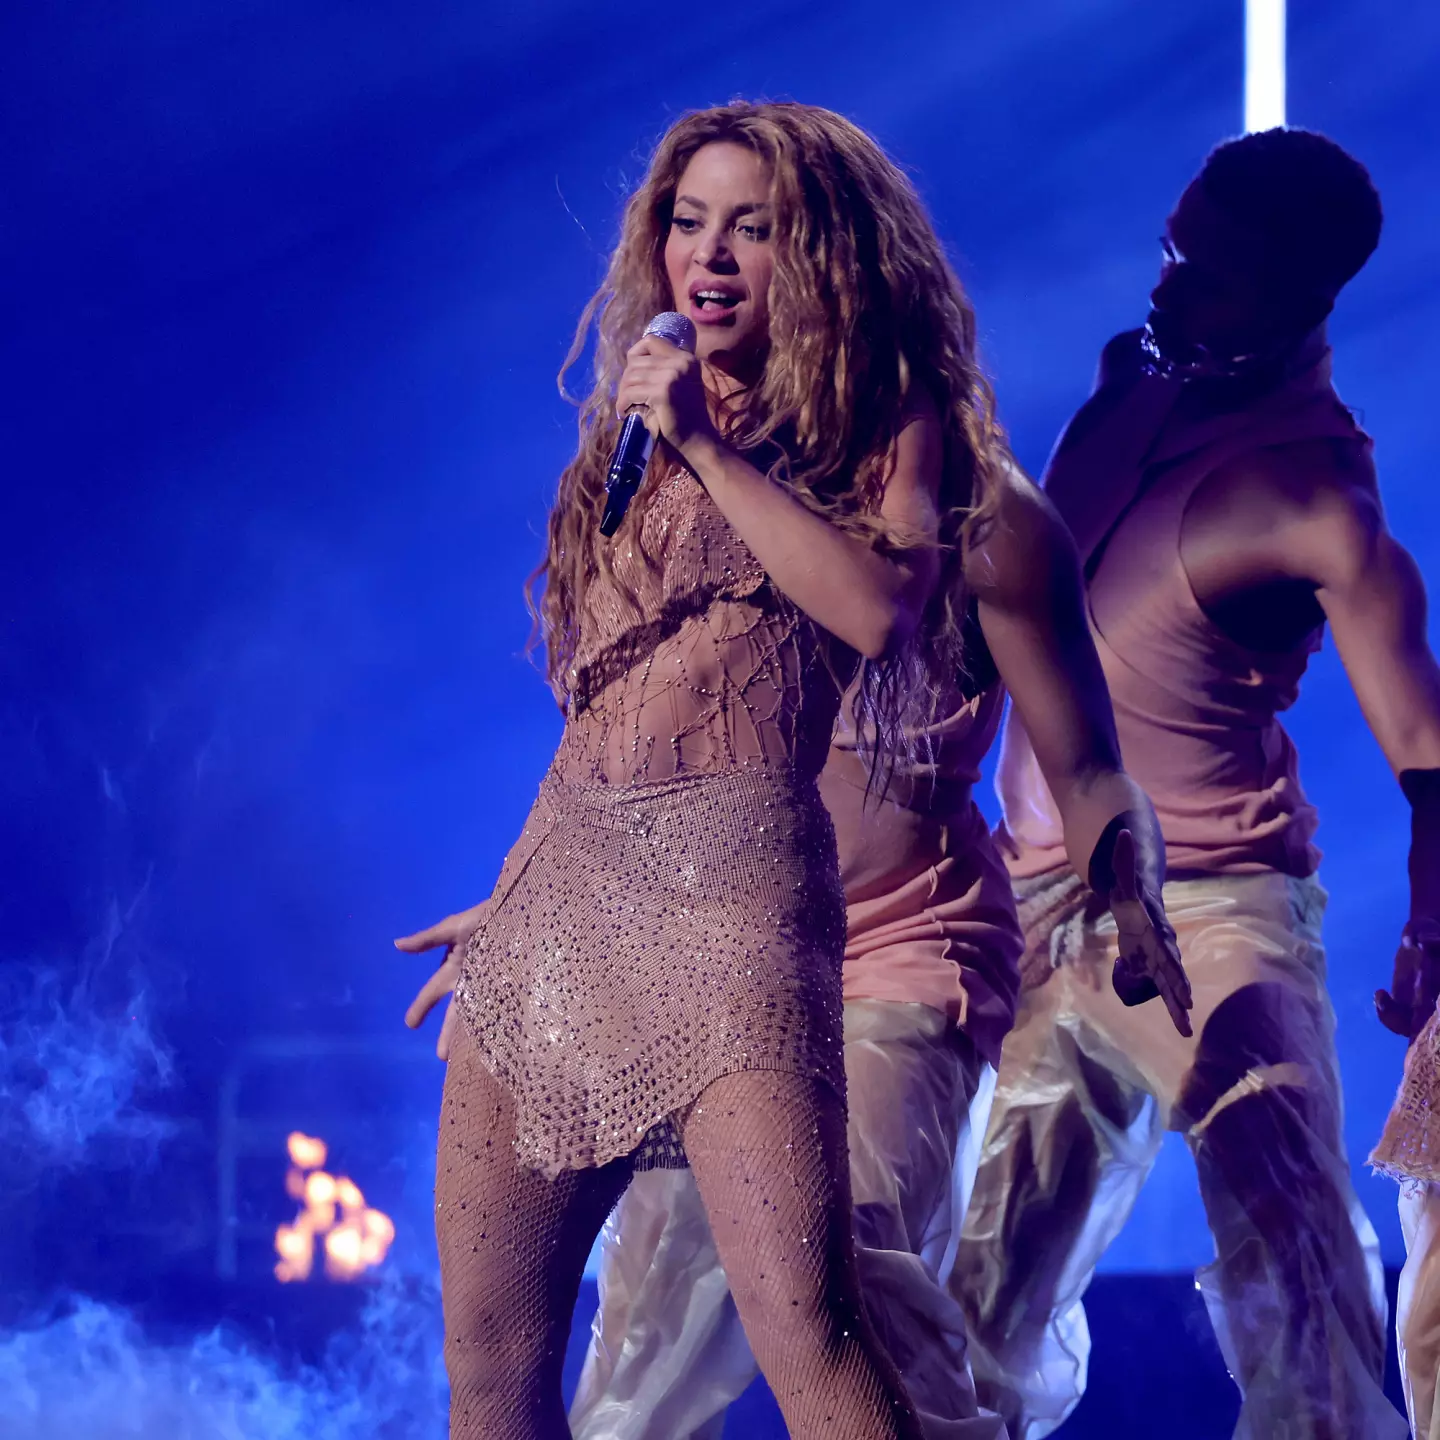 Shakira performs at the MTV Video Music Awards on Tuesday. (Kevin Mazur / Getty Images for MTV)